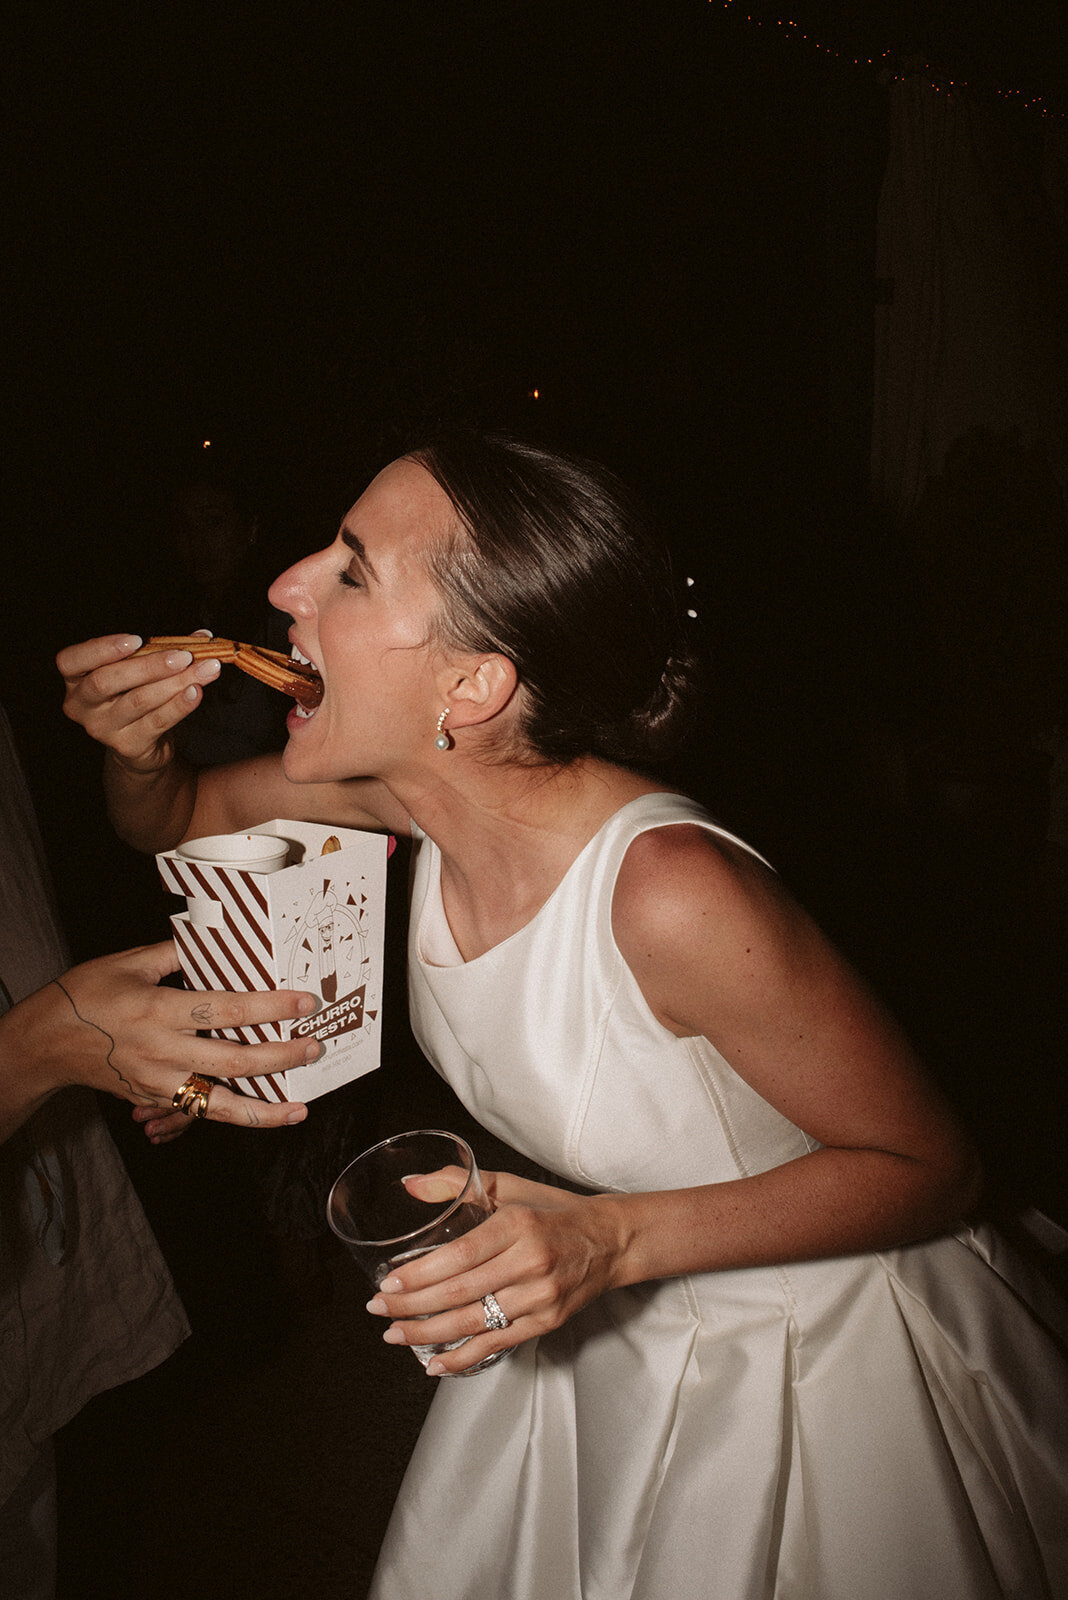 The bride enjoying some chocolate with churros